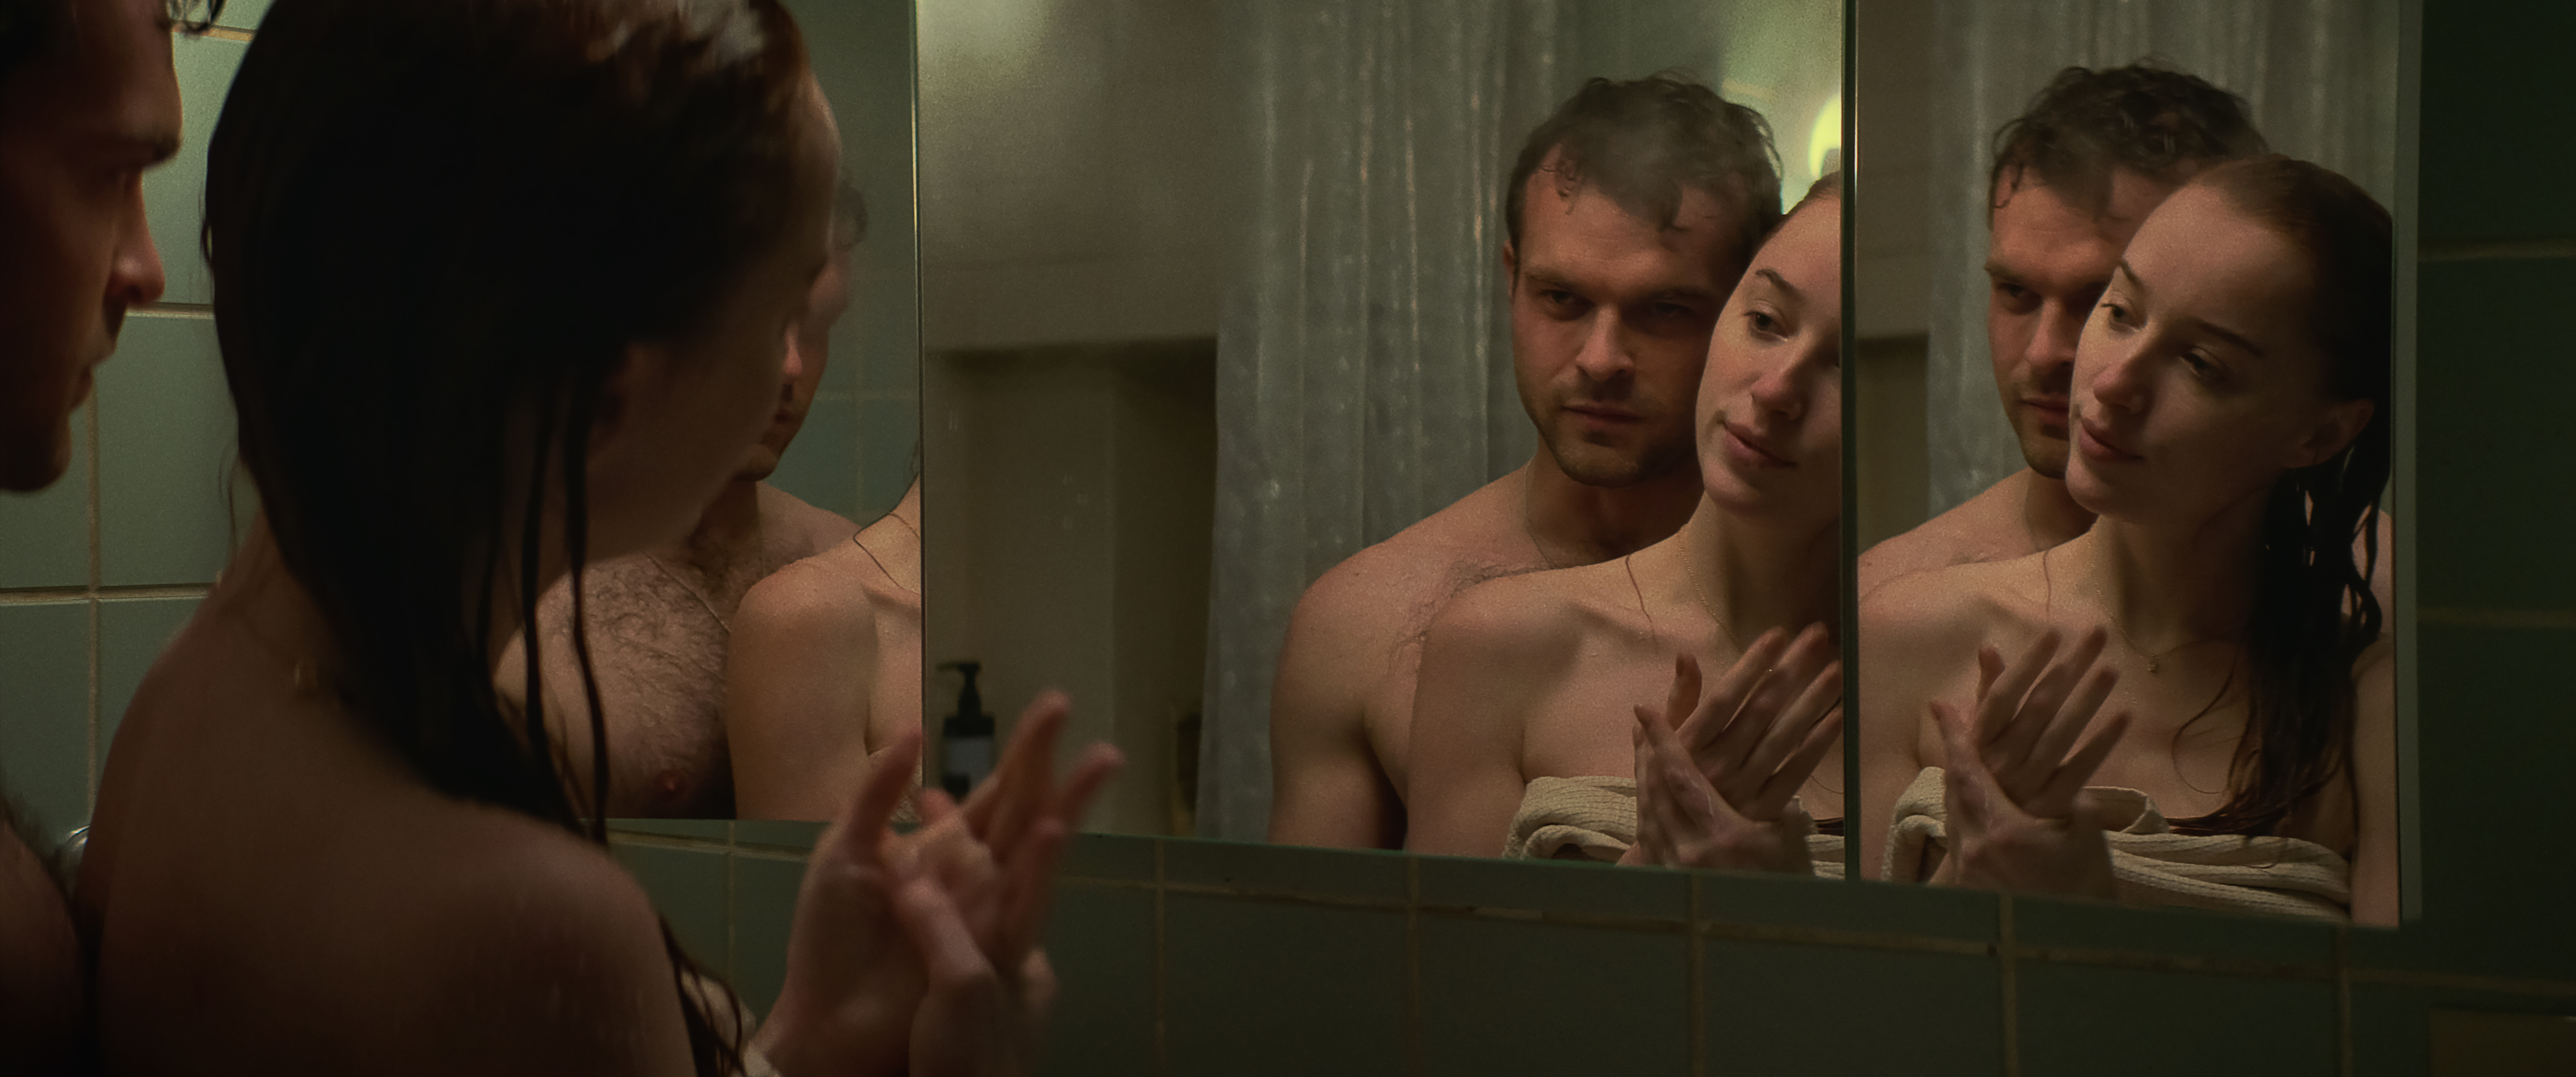 Luke (Alden Ehrenreich) and Emily (Phoebe Dynevor), both wet from the shower and with Emily only wearing a wrapped towel around her torso, look at multiple reflections of themselves in their bathroom mirrors in Netflix’s Fair Play